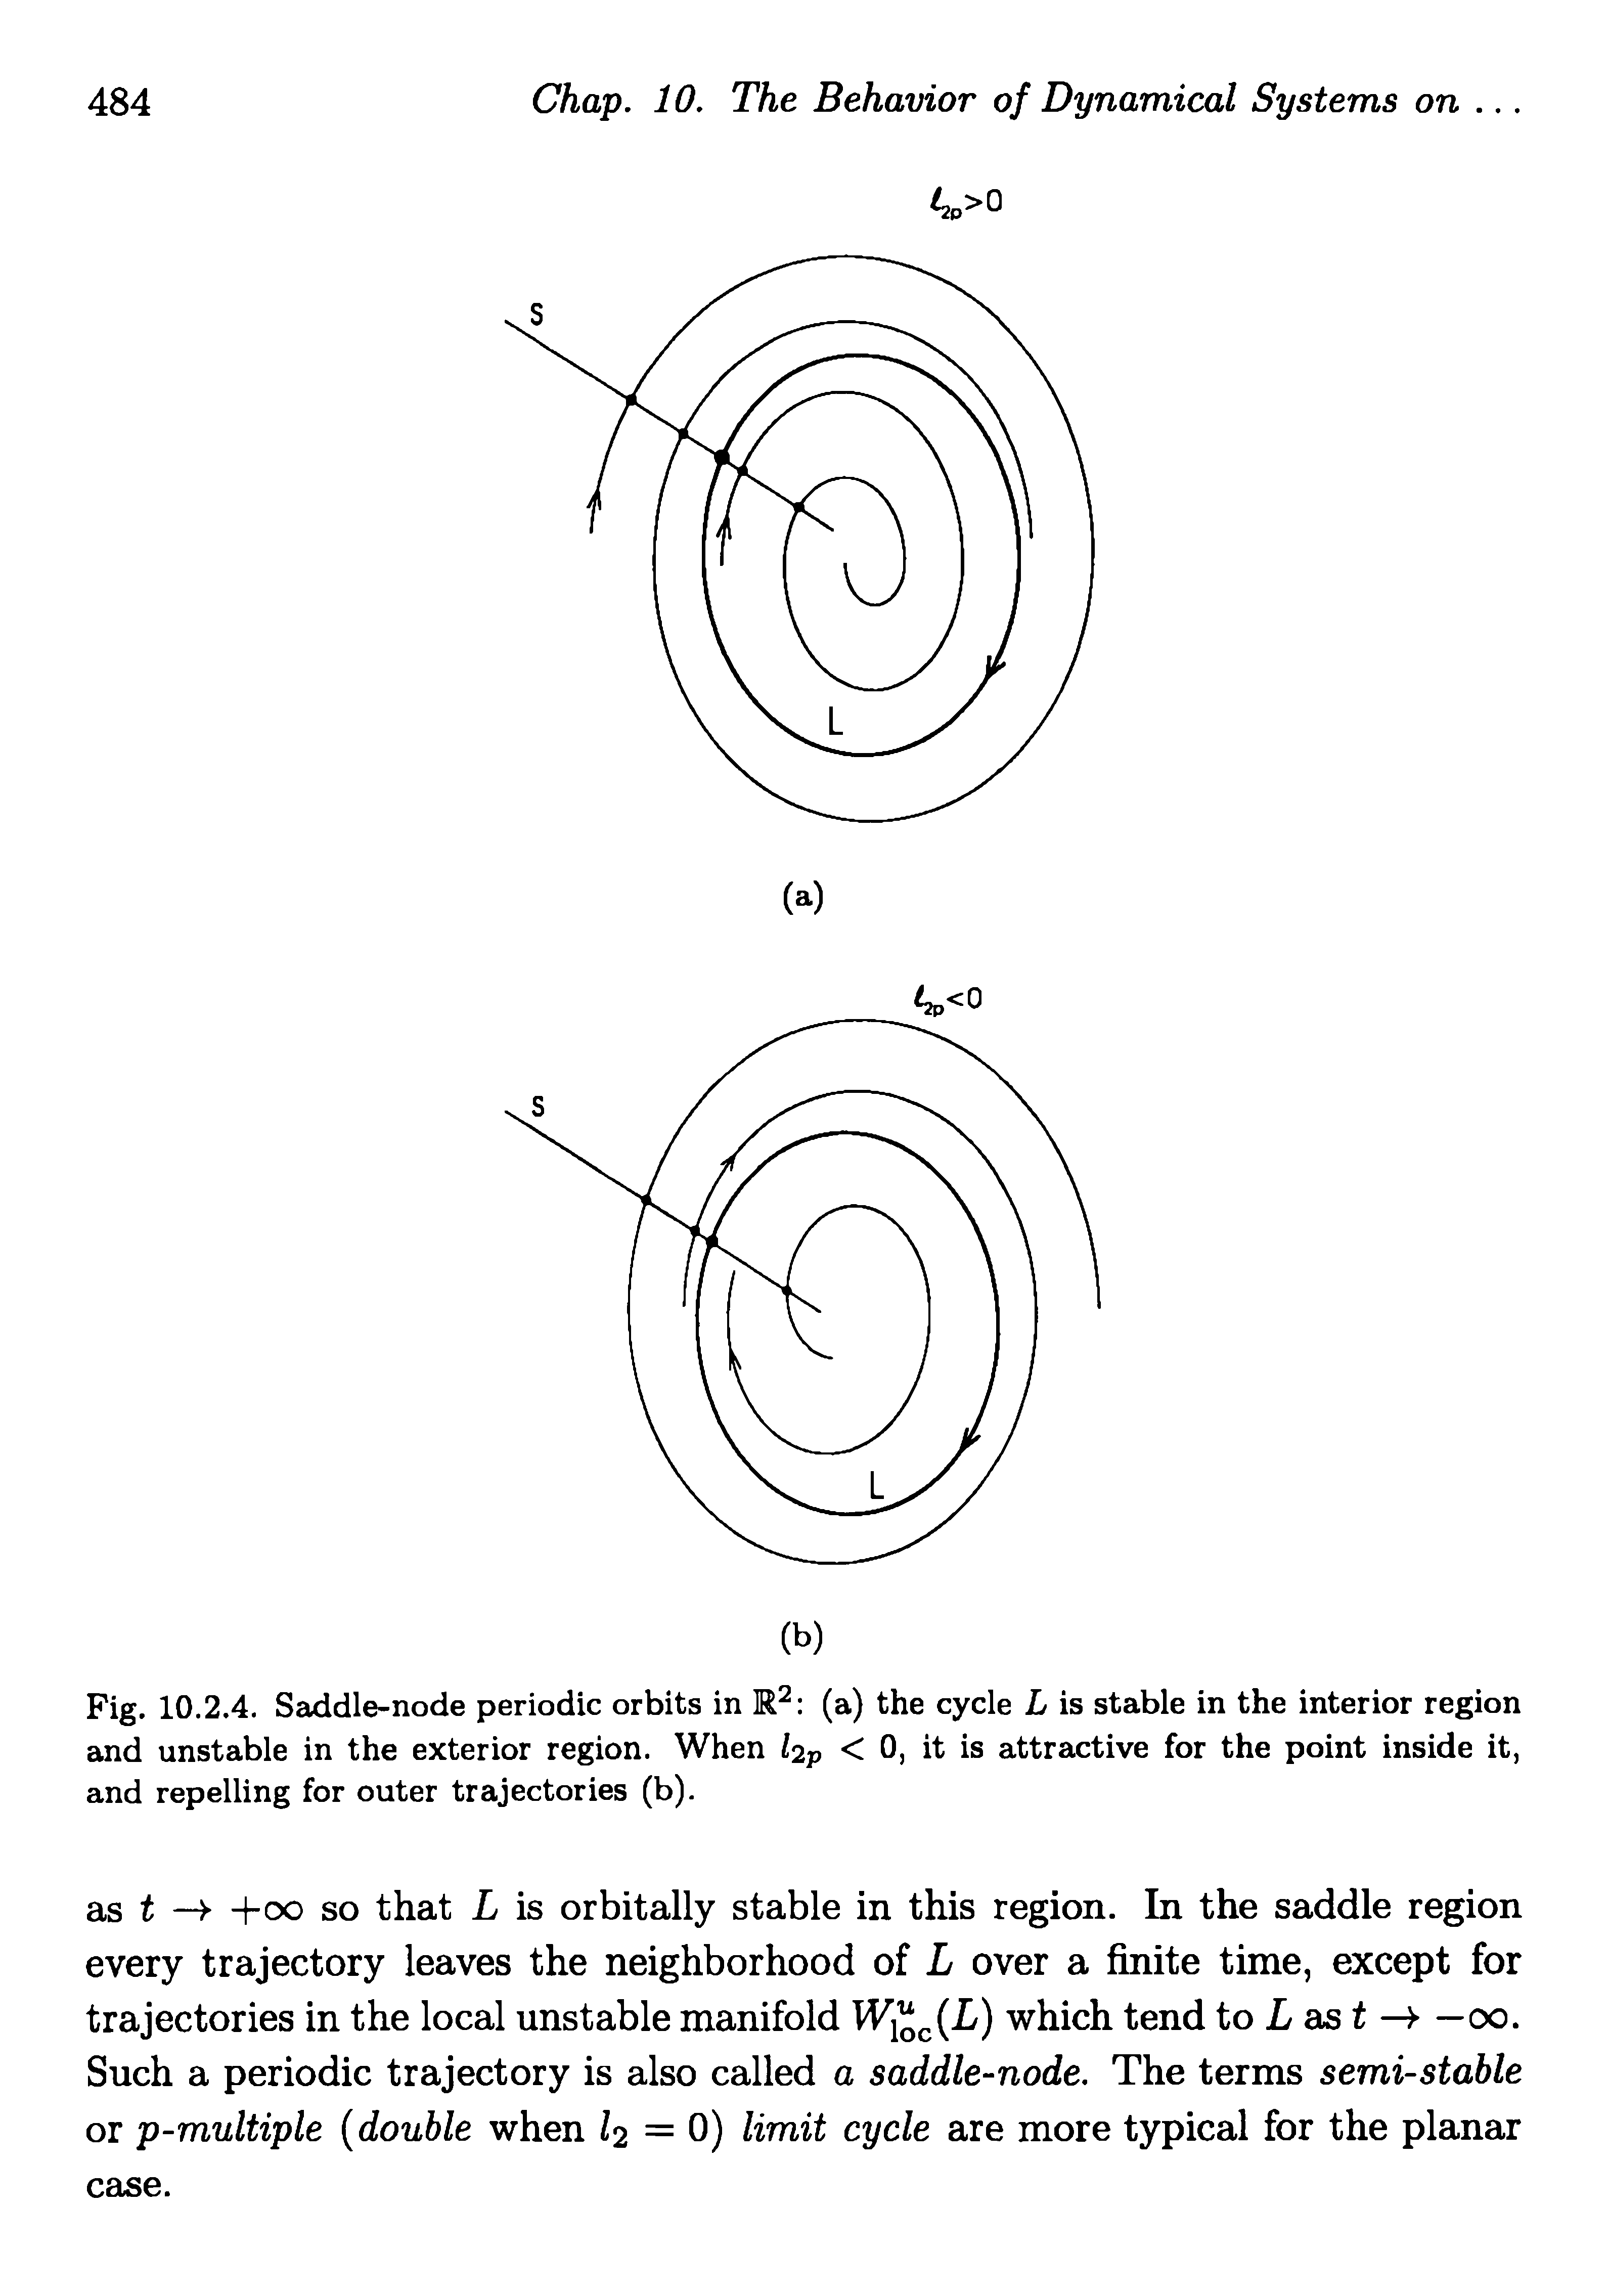 Fig. 10.2.4. Saddle-node periodic orbits in (a) the cycle L is stable in the interior region and unstable in the exterior region. When hp < 0, it is attractive for the point inside it, and repelling for outer trajectories (b).